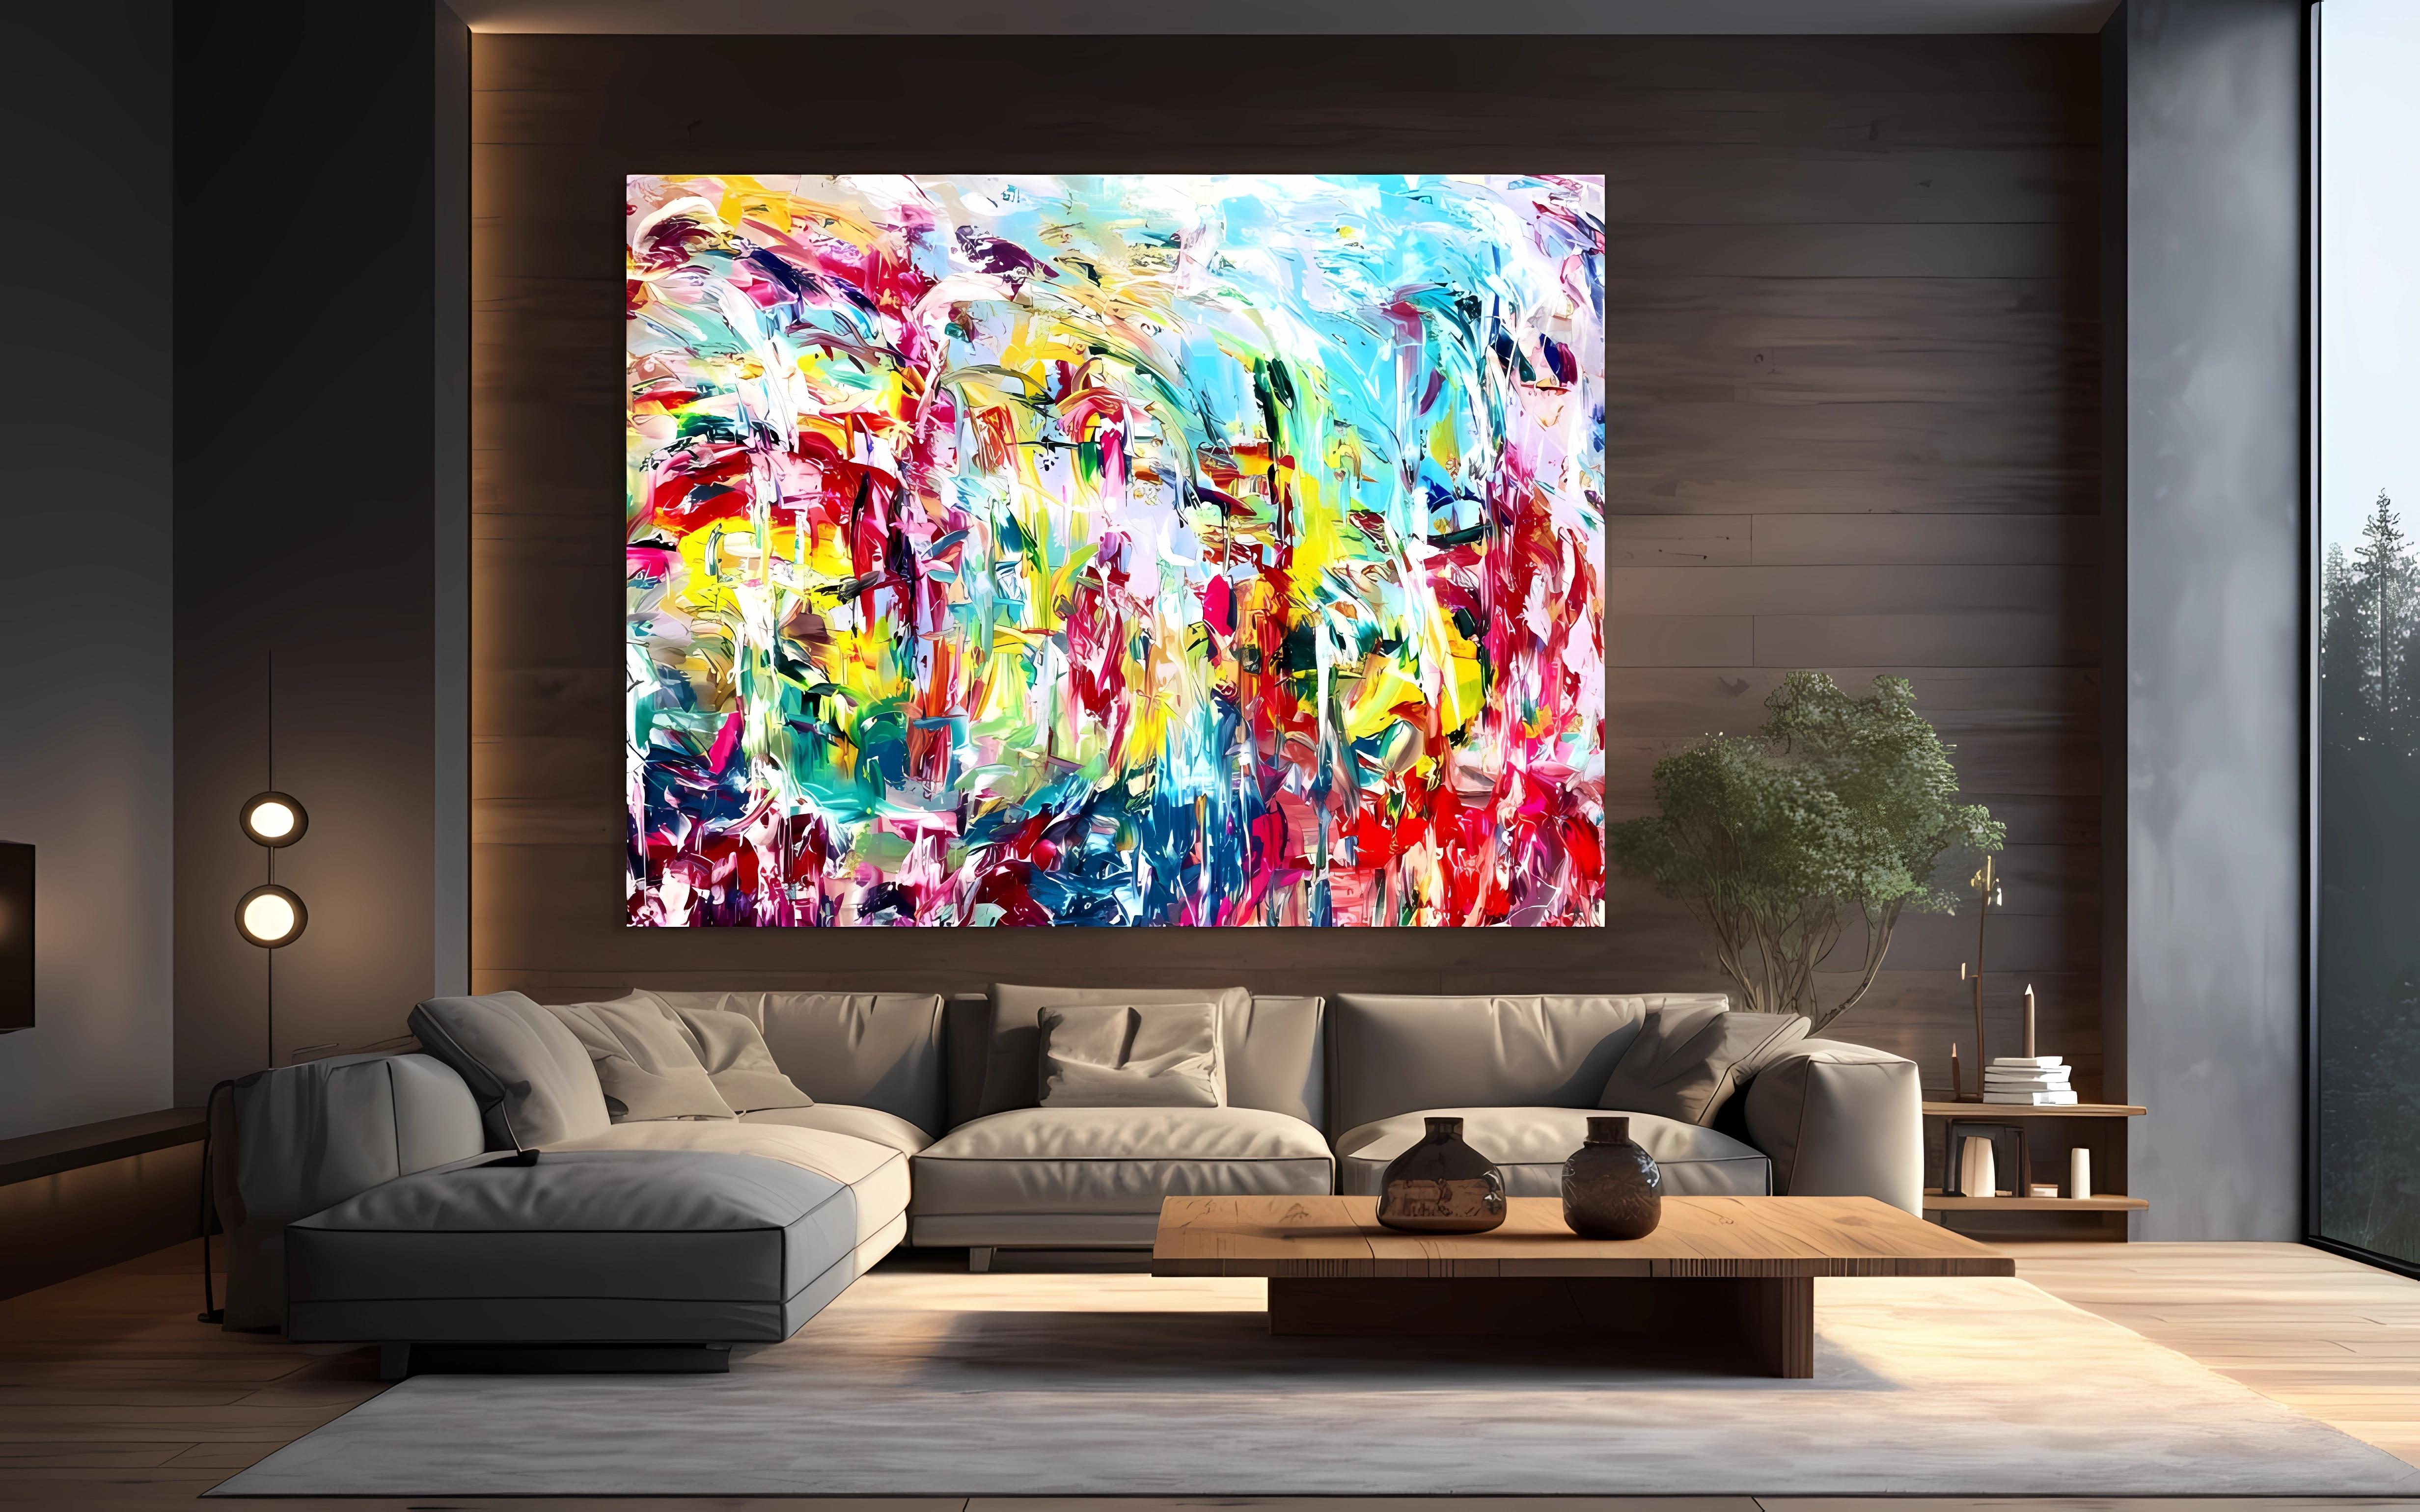 Koko de Machimasu (I'll Wait Here) - Abstract Expressionist Painting by Estelle Asmodelle